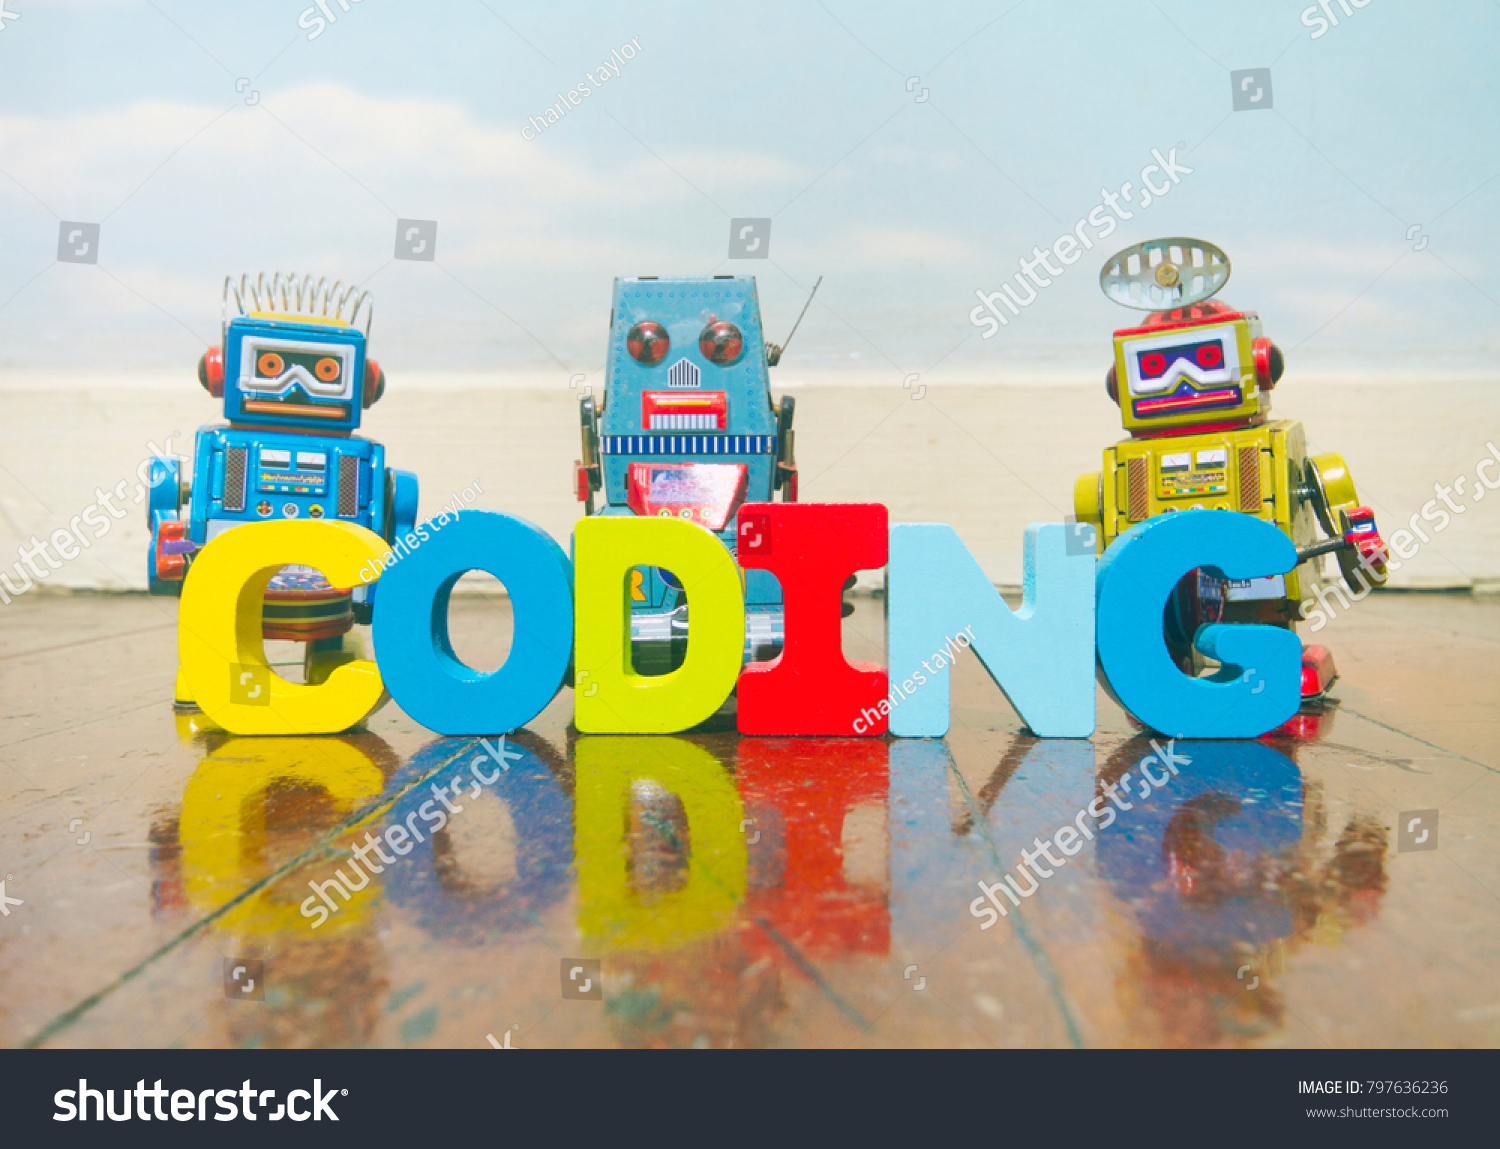 the word coding wit wooden letters on a old wooden floor with retro robot toys #797636236